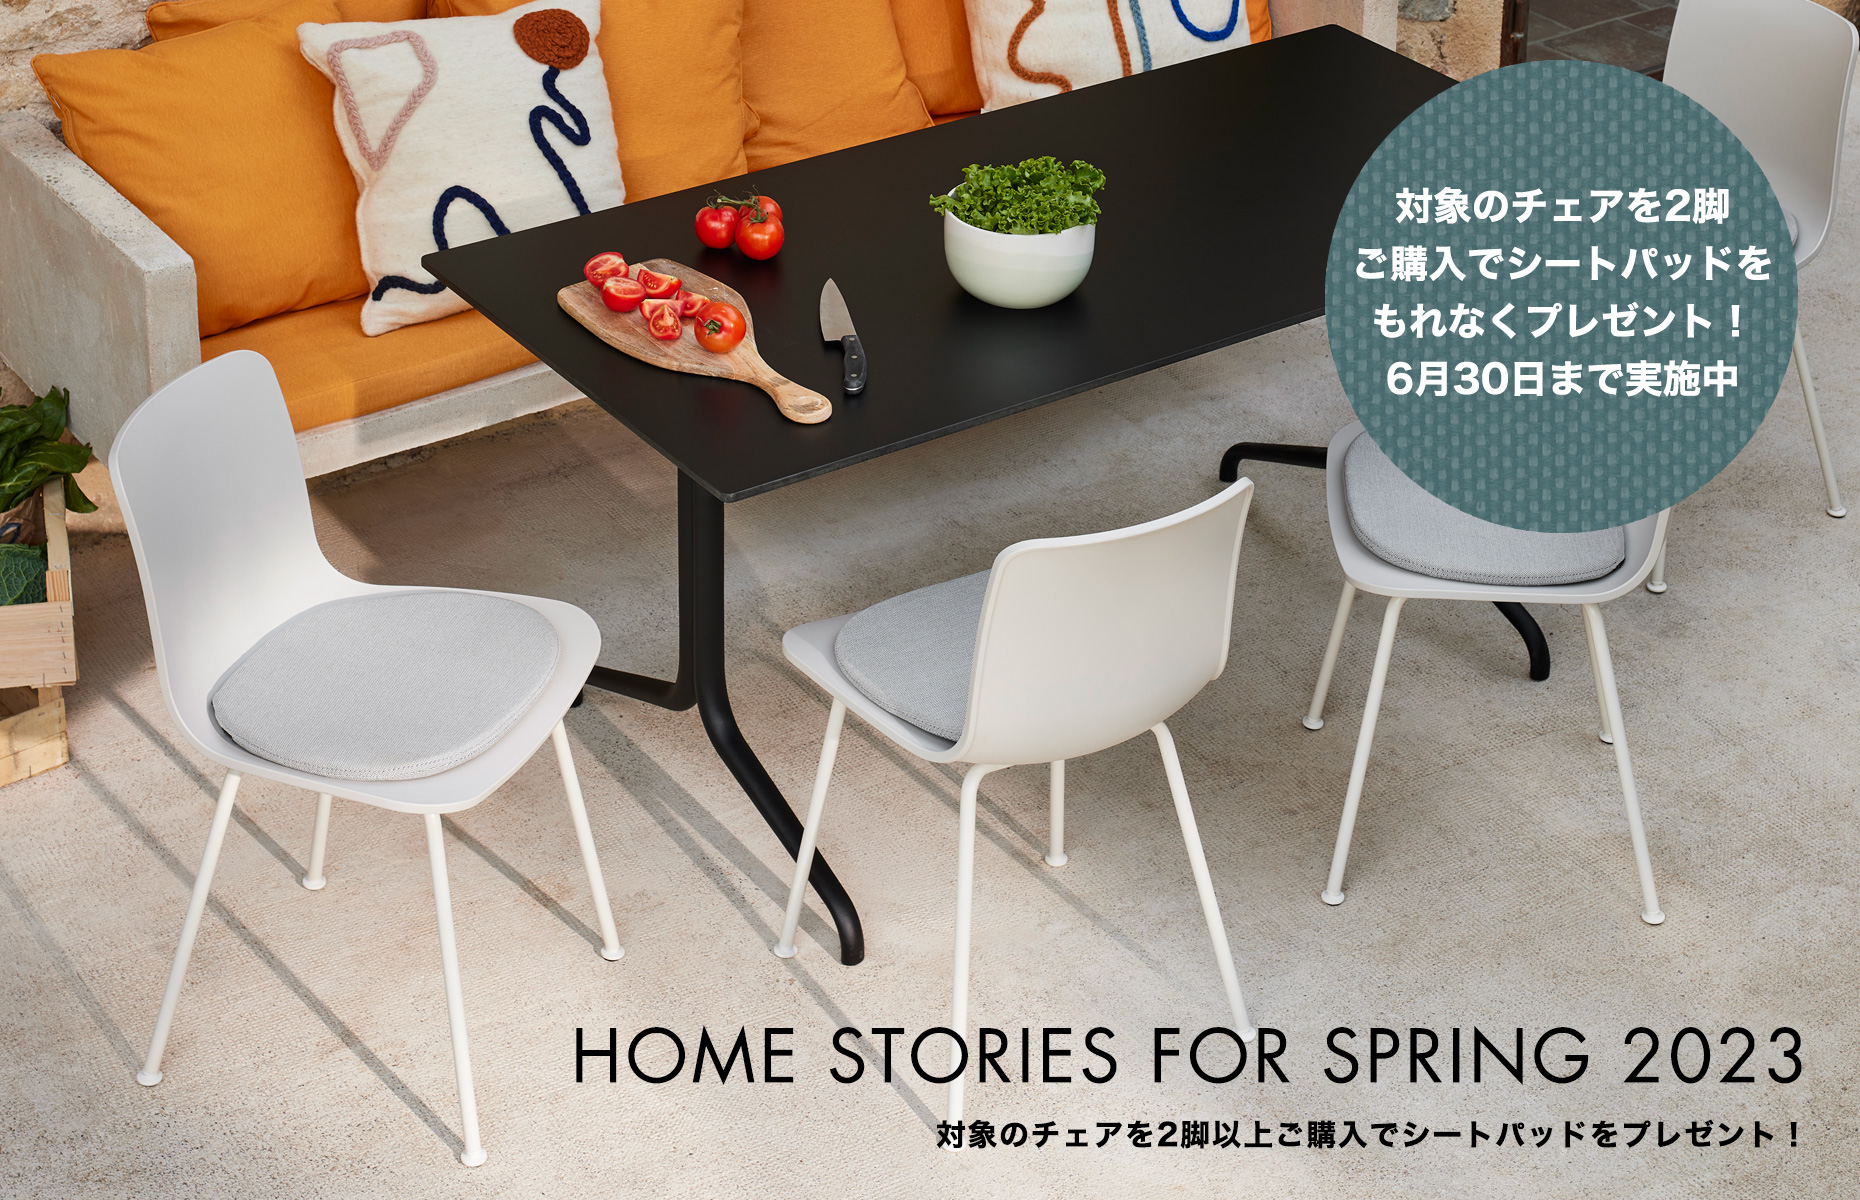 vitra HOME STORIES FOR SPRING 2023